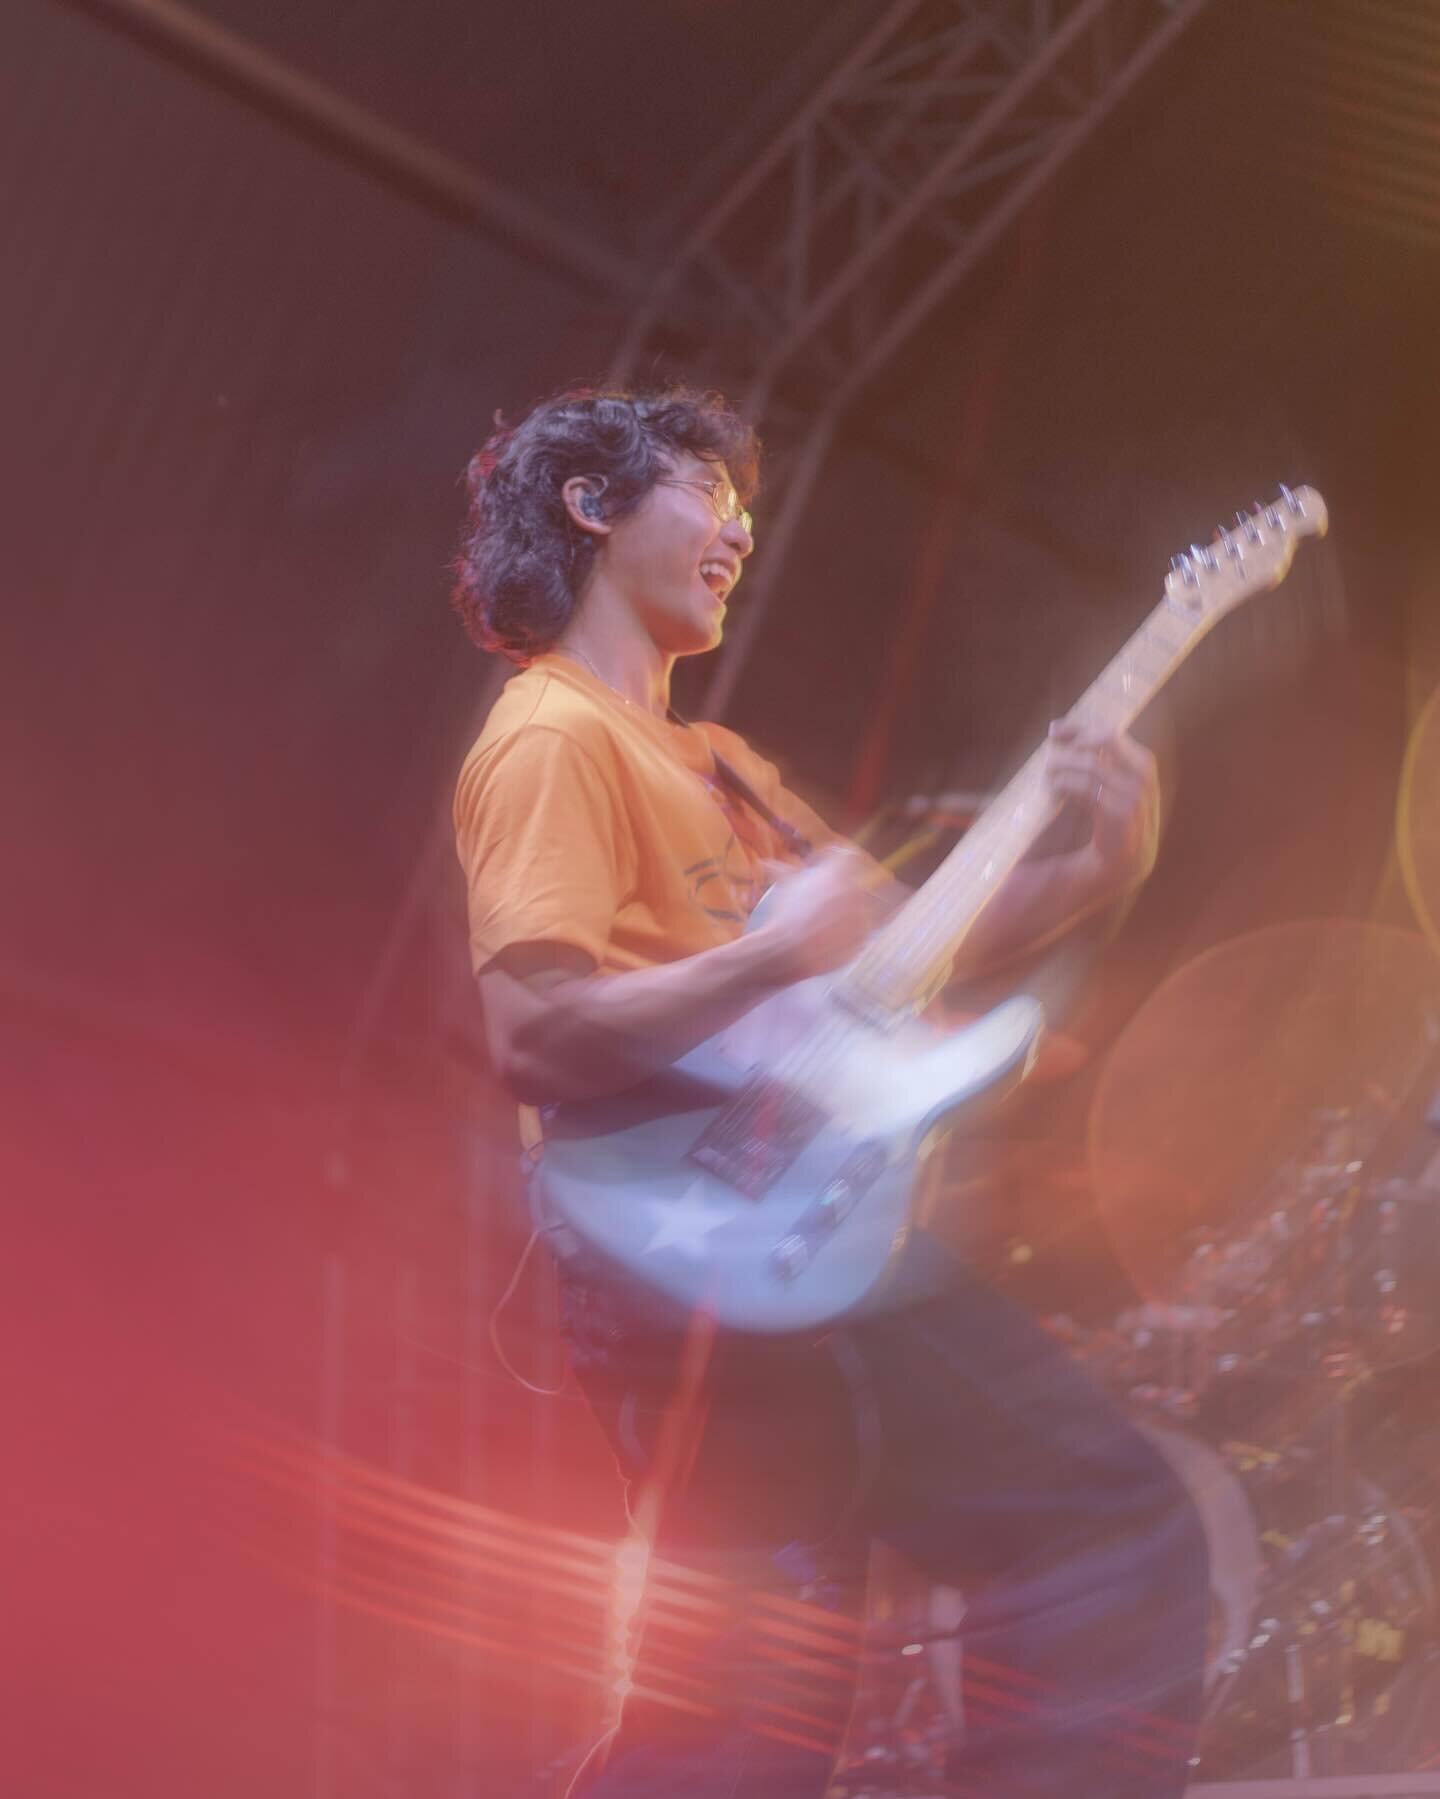 Rice &amp; Spice goes international 🌏 grentperez was still coming of age on the growing up? tour at Singapore&rsquo;s Pasir Panjang Power Station on Sunday night. This was the fourth time staff photographer Sylvie Lam @sylvies.photos has photographe